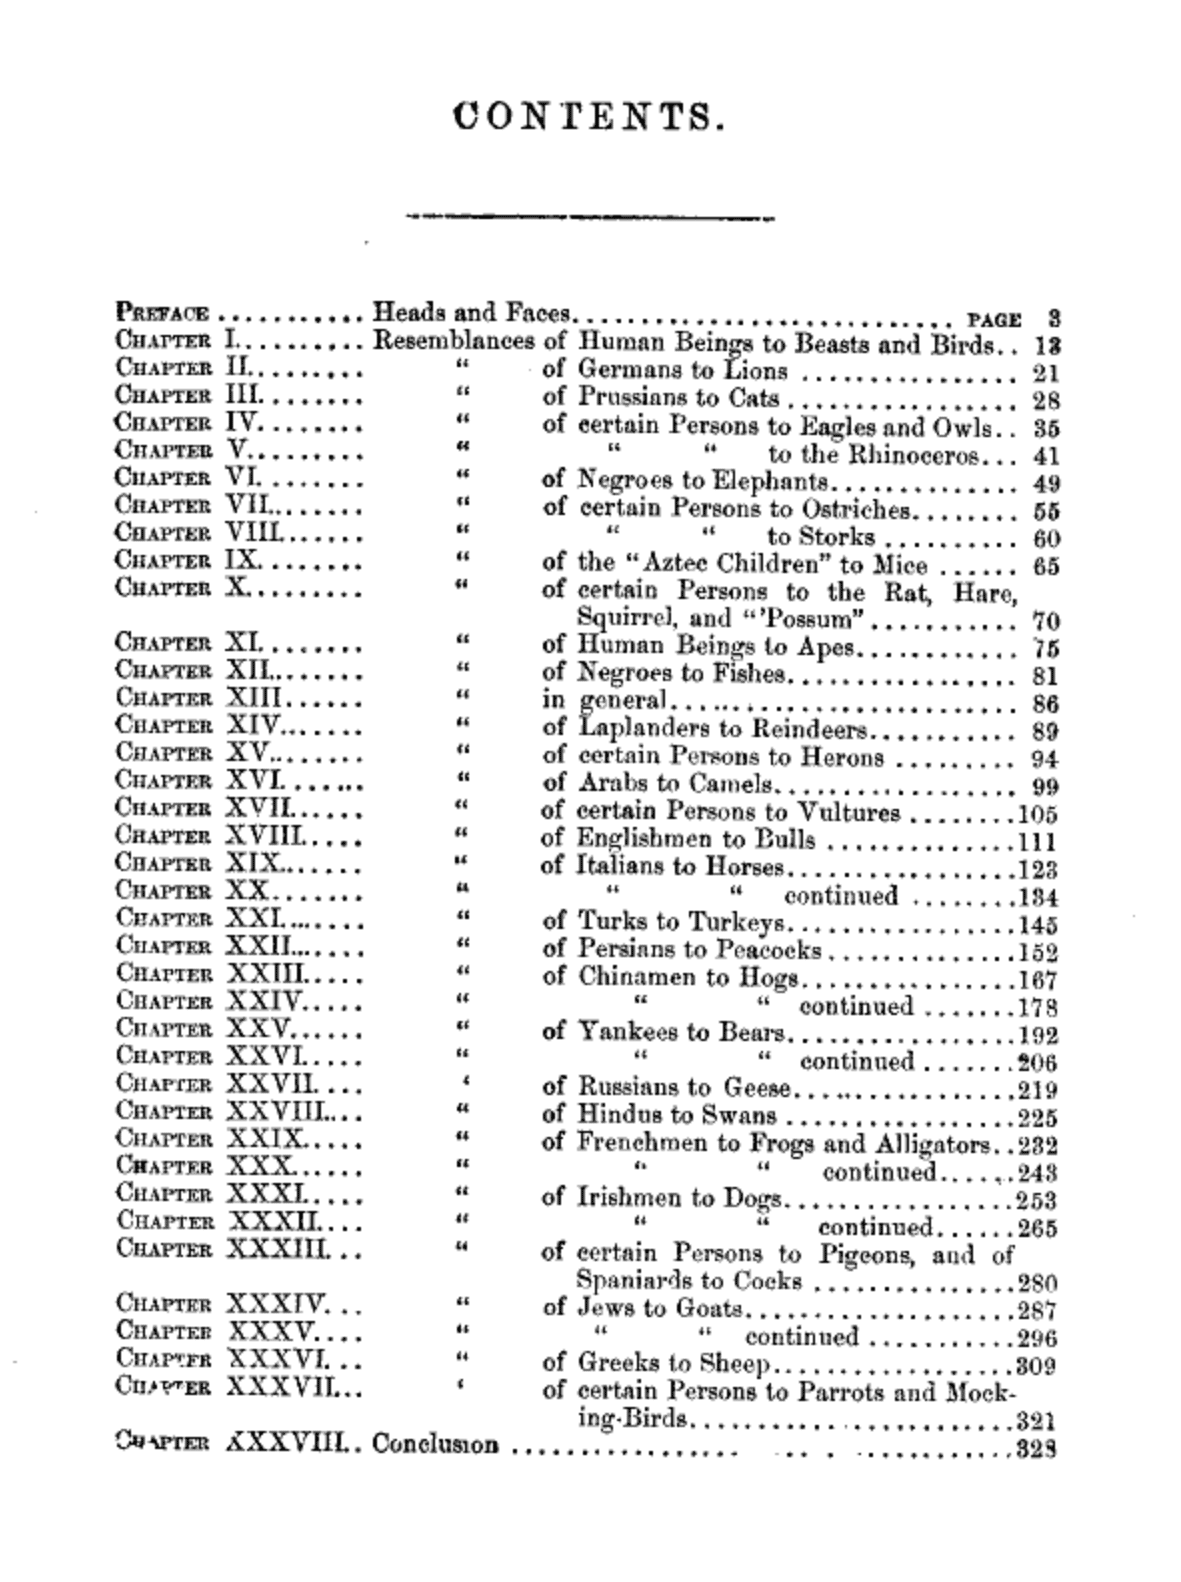 Contents of the book.